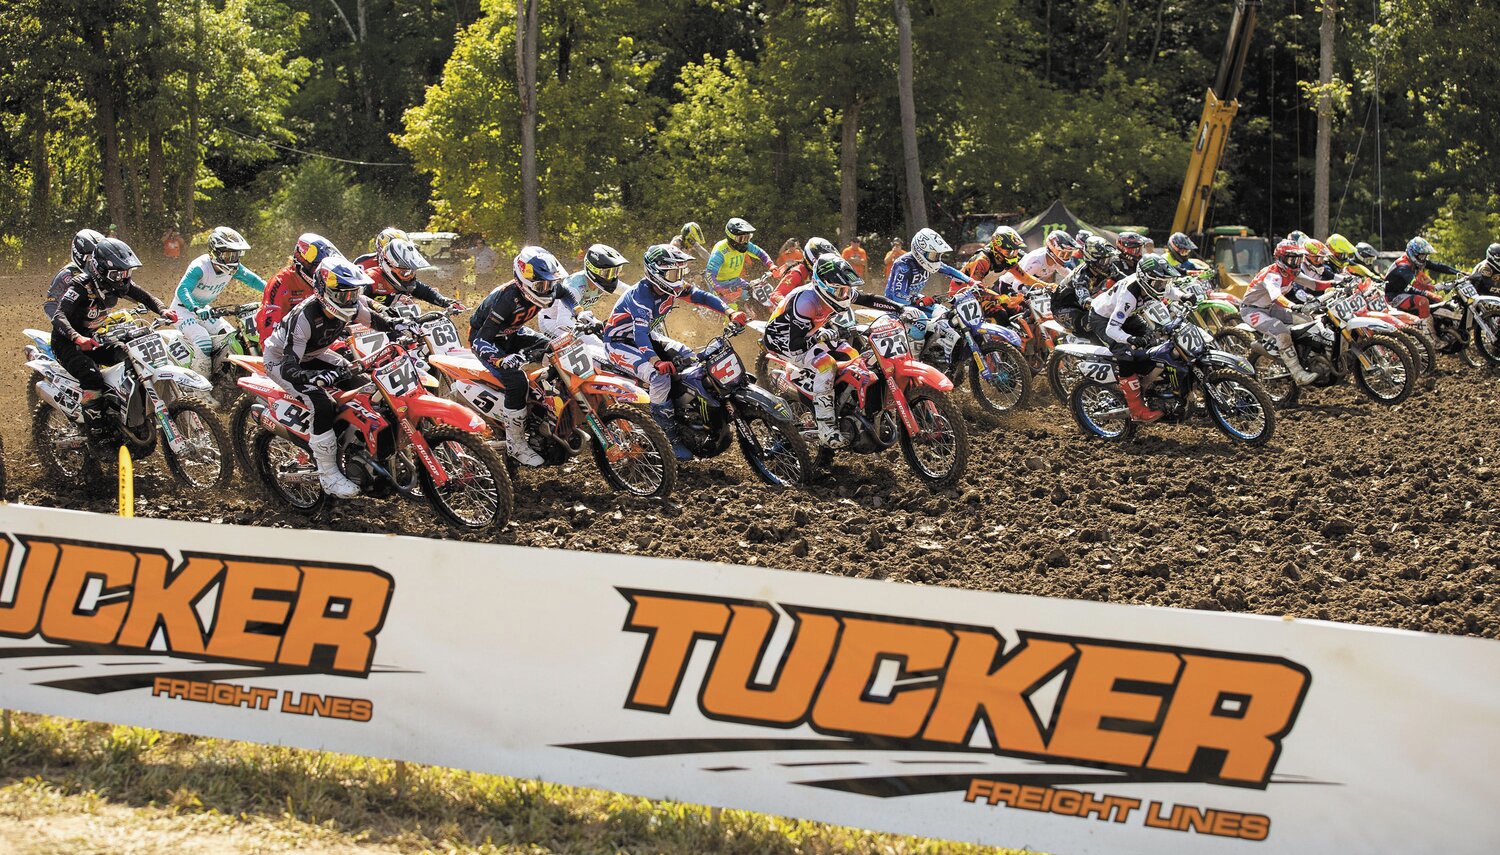 Motocross racing and fans will converge on Crawfordsville beginning Thursday through Sunday for the Tucker Freight Lines Ironman National at Ironman Raceway.